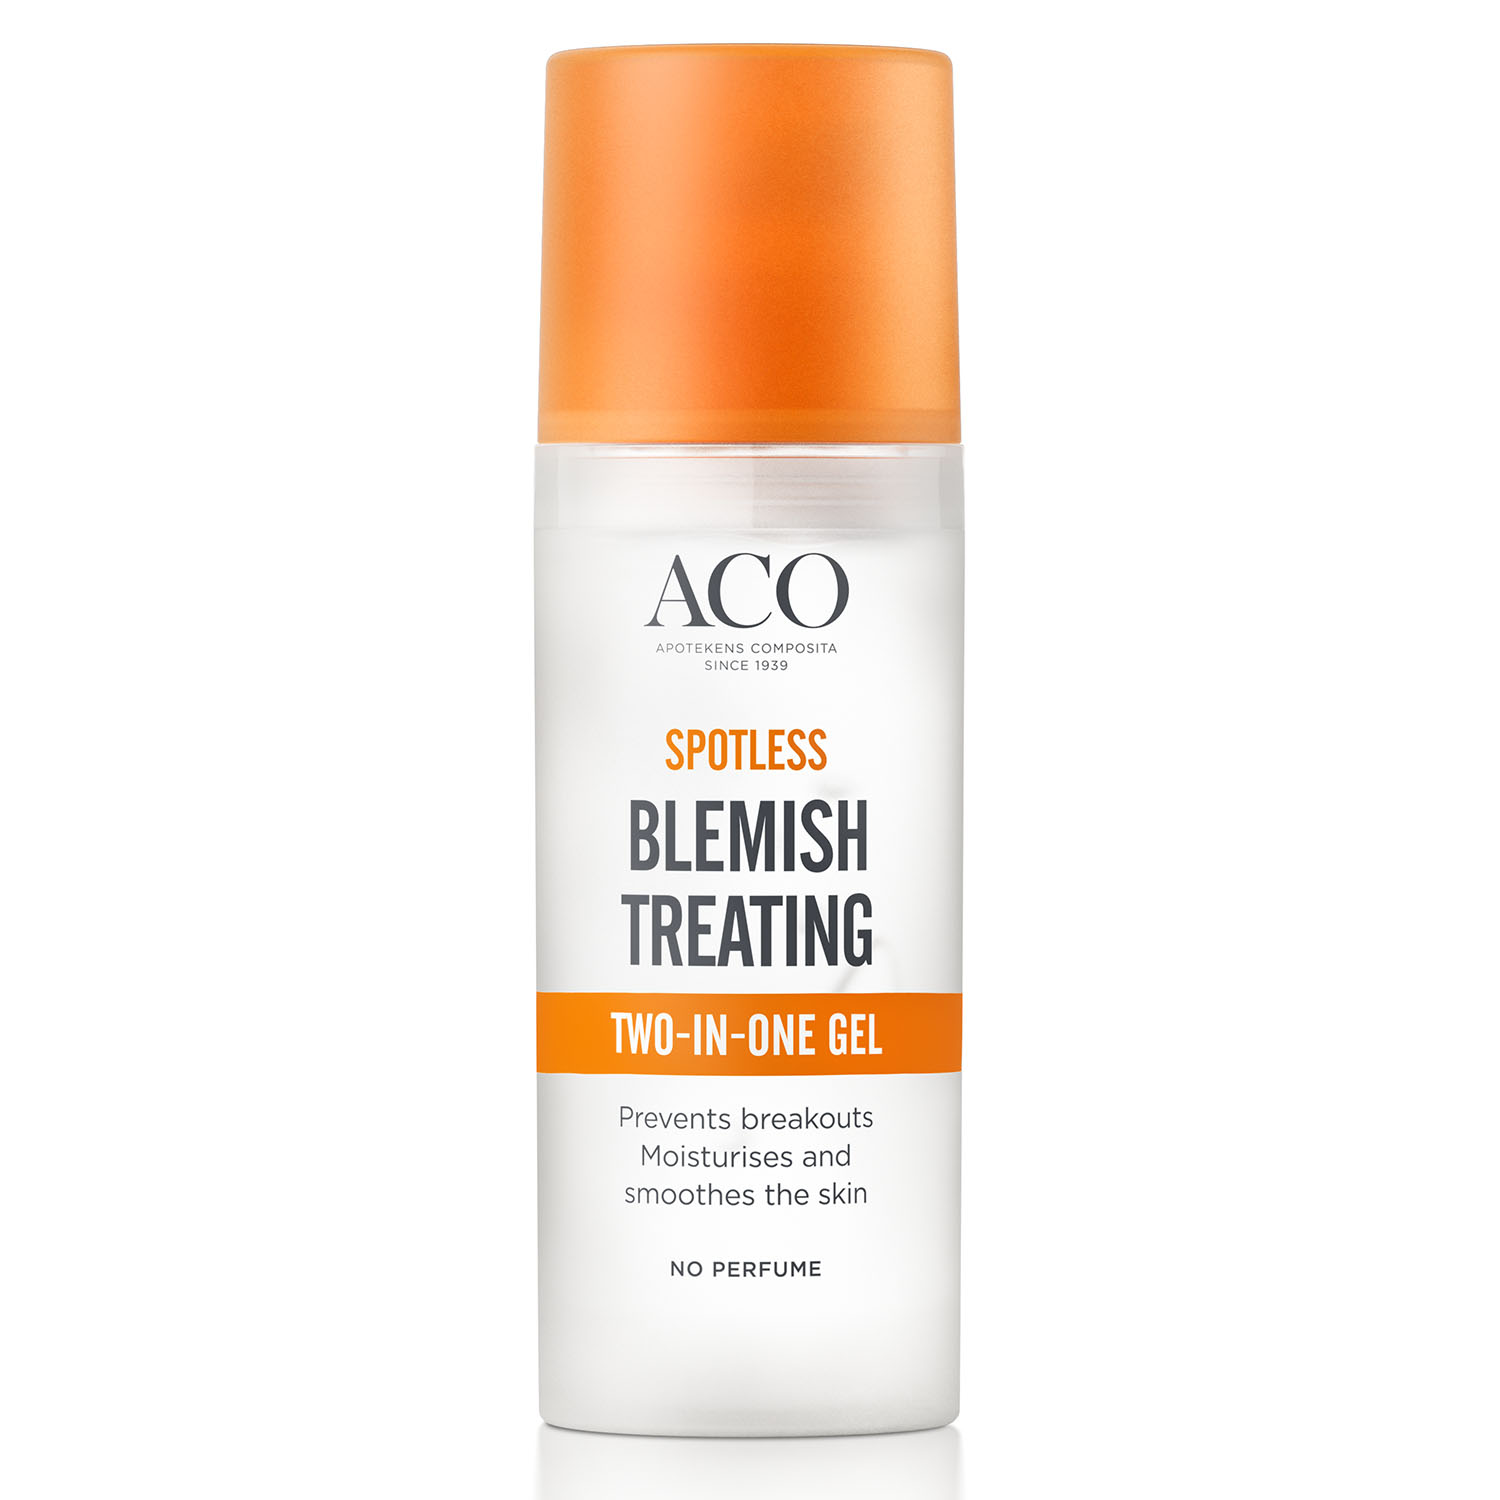 ACO Spotless Blemish Treating Two-in-One Gel, 50 ml